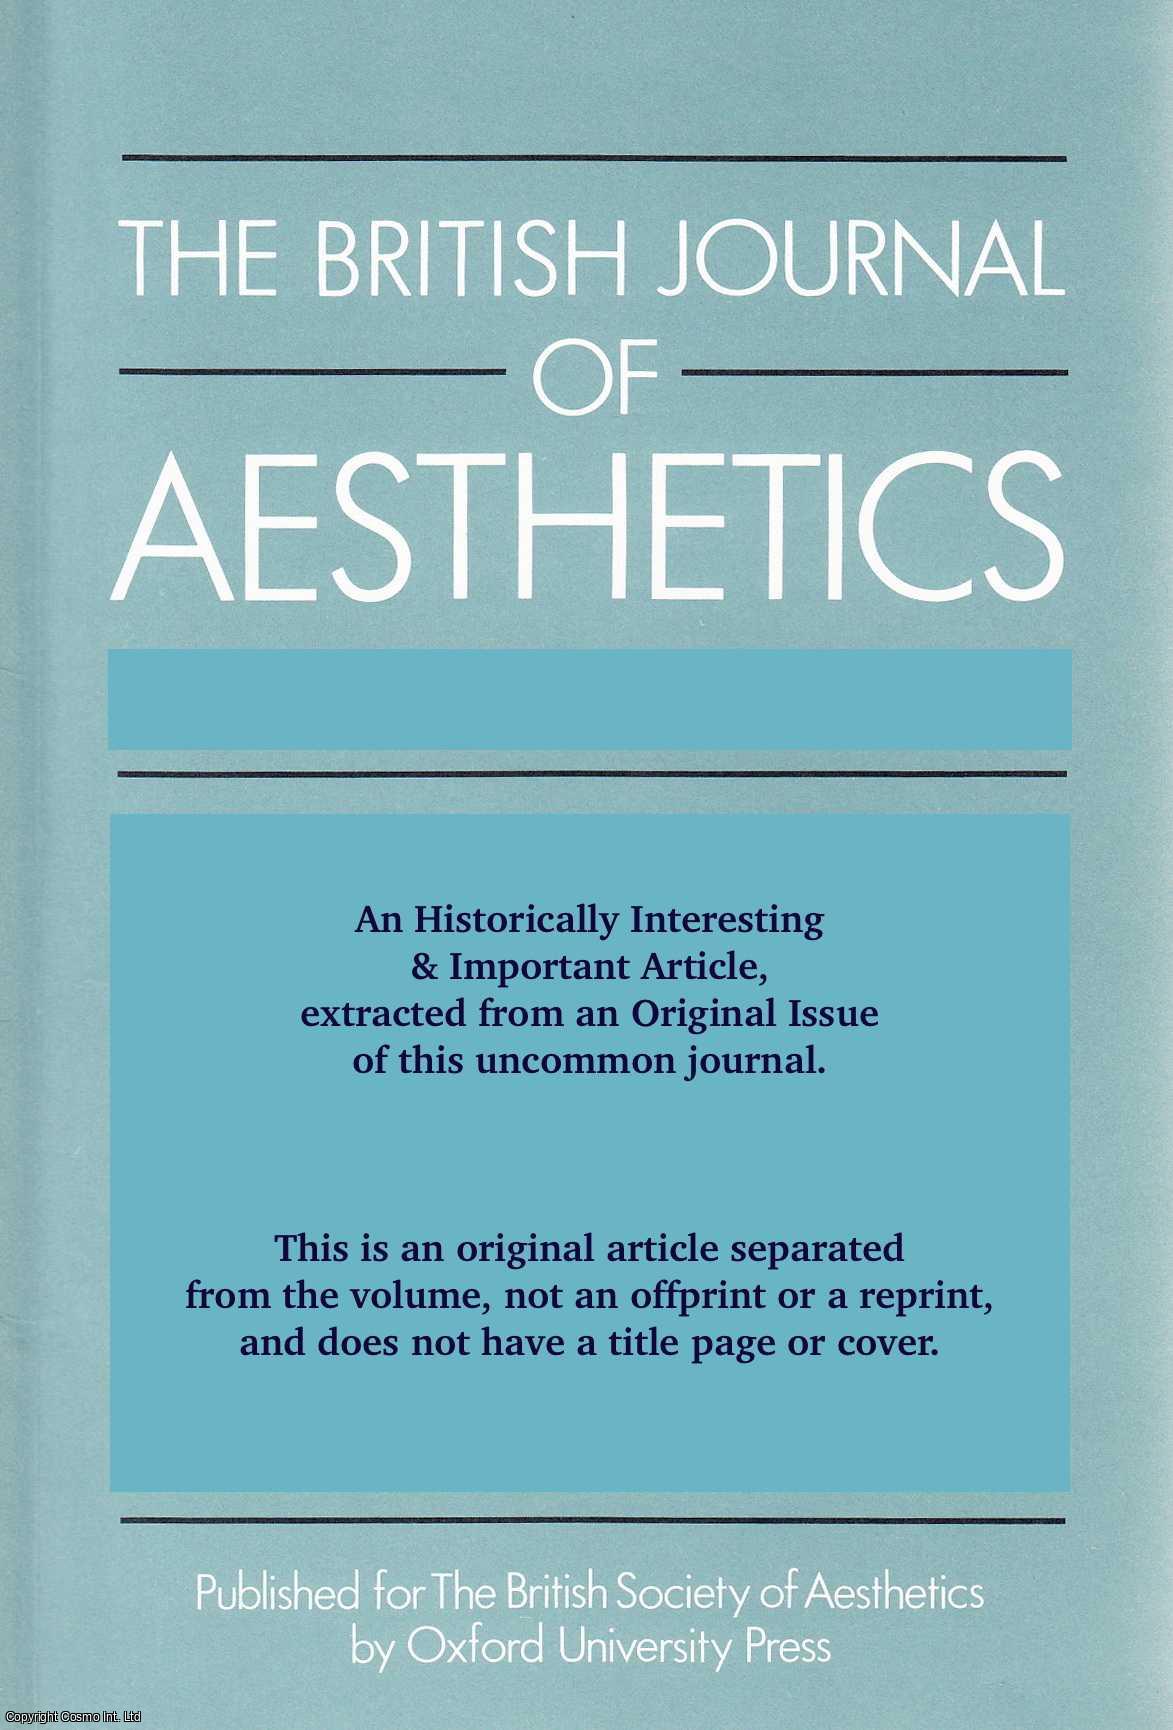 Mary Carman Rose - Nature as an Aesthetic Concept: An Essay in Meta-Aesthetics. An original article from the British Journal of Aesthetics, 1976.